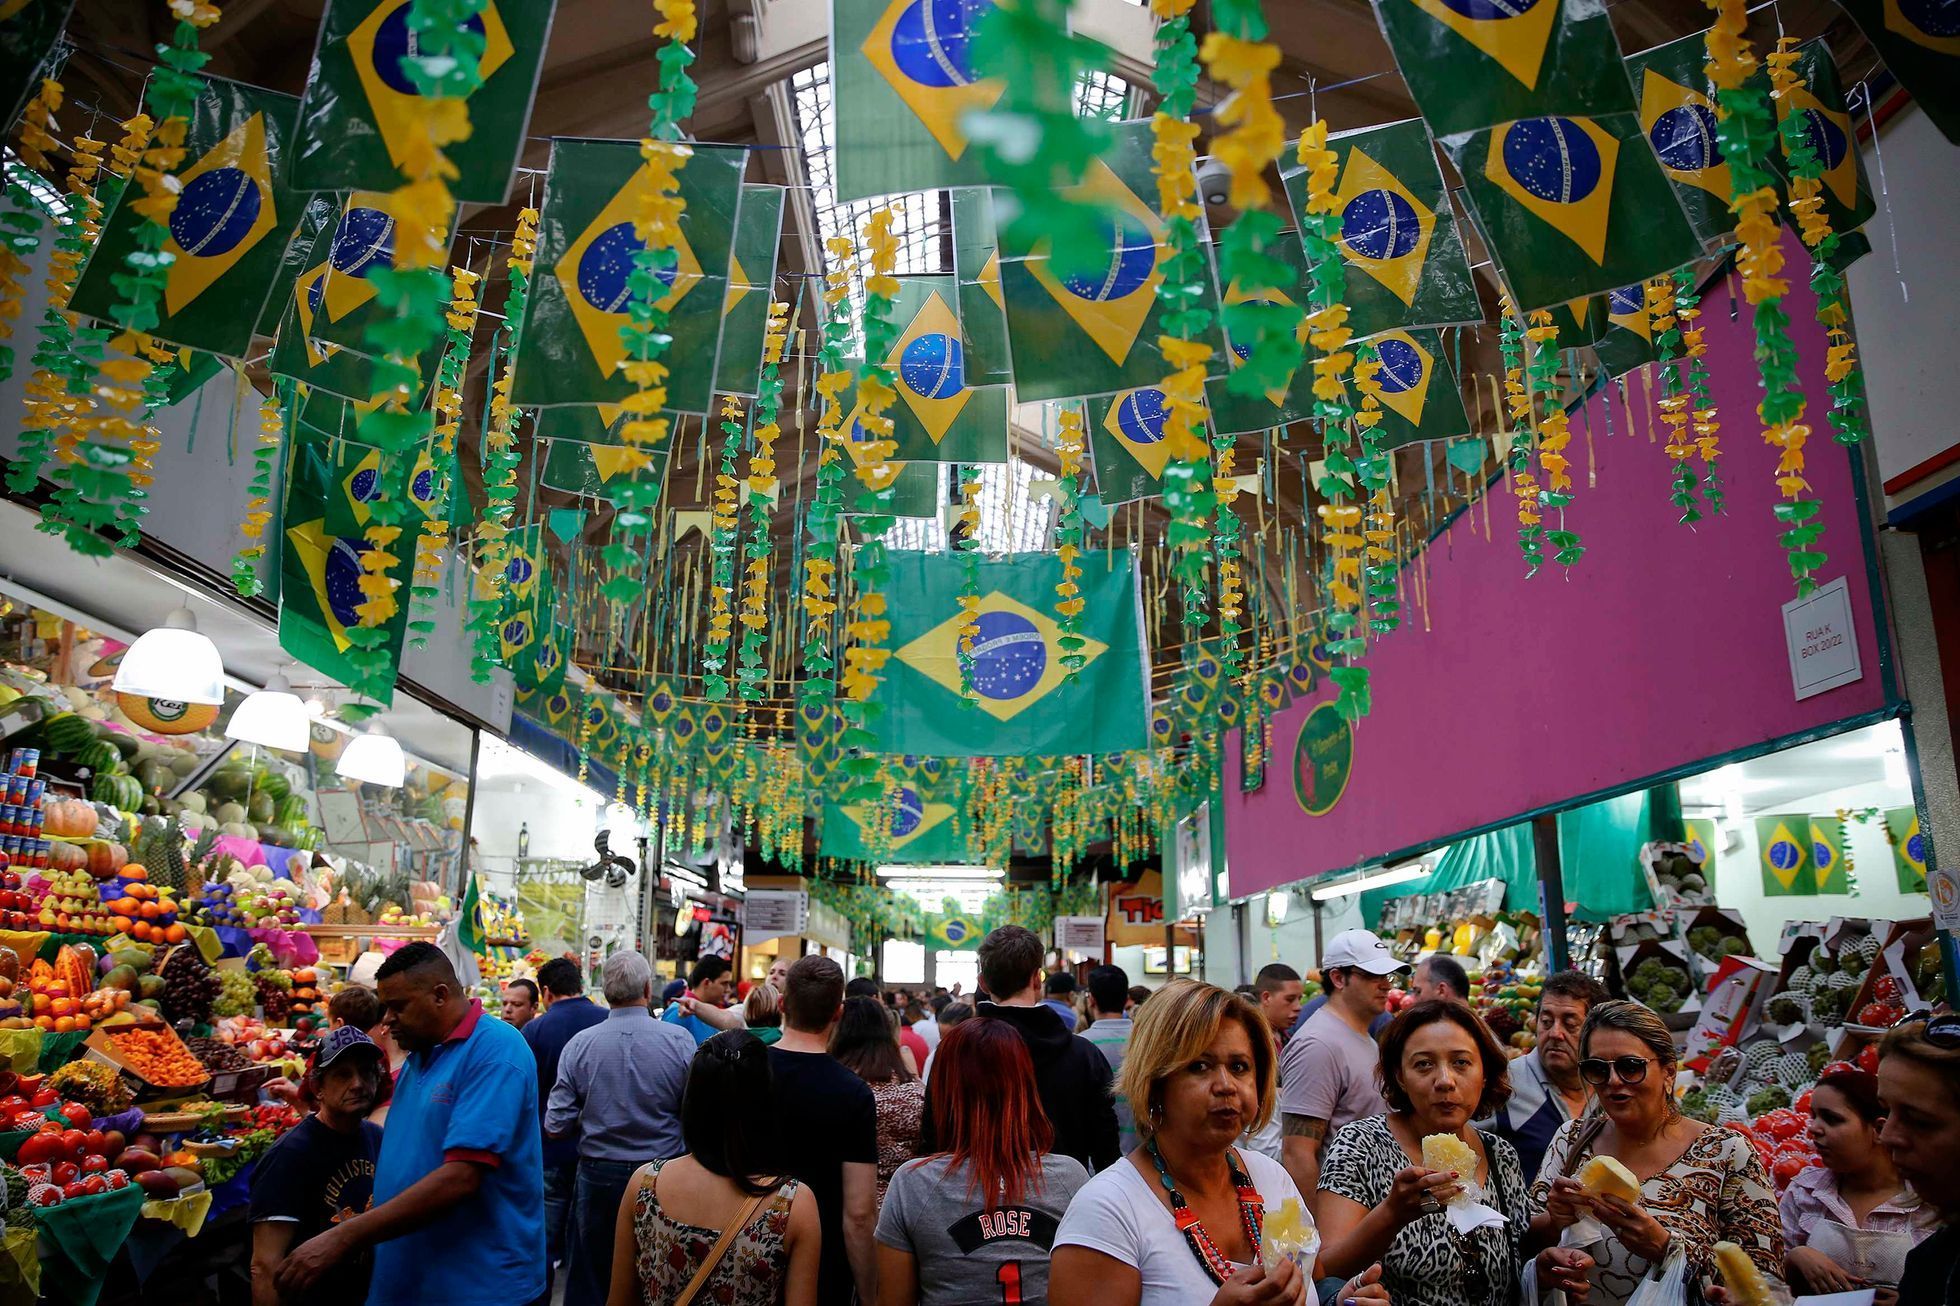 People eat snacks under Brazilian flags at a market decorated for the upcoming World Cup in Sao Paulo